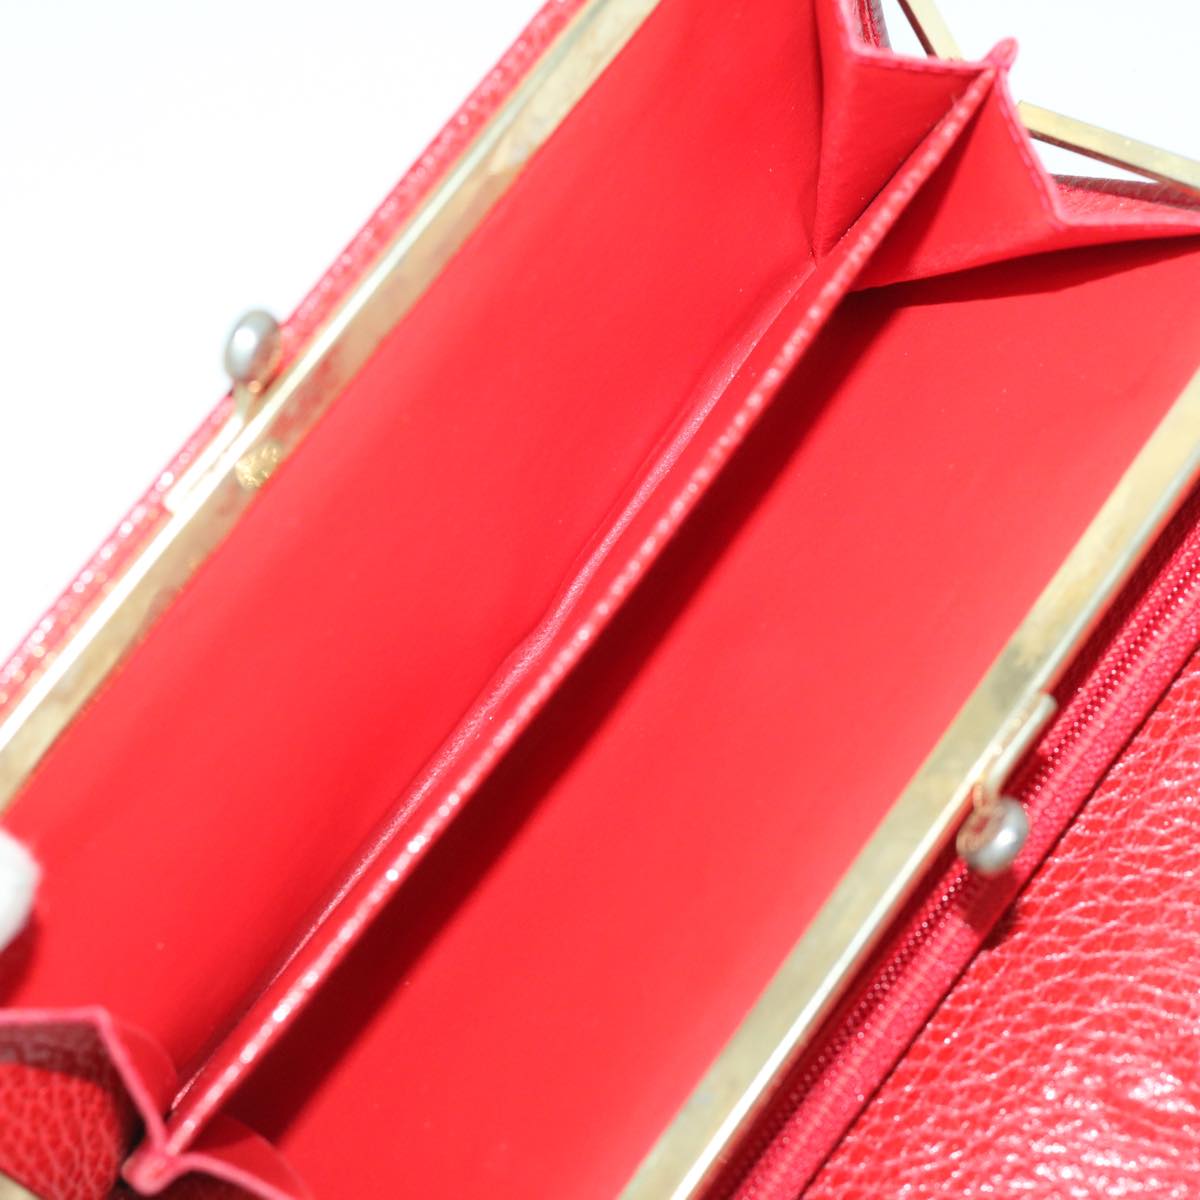 CELINE Wallet Leather Red Auth 68033